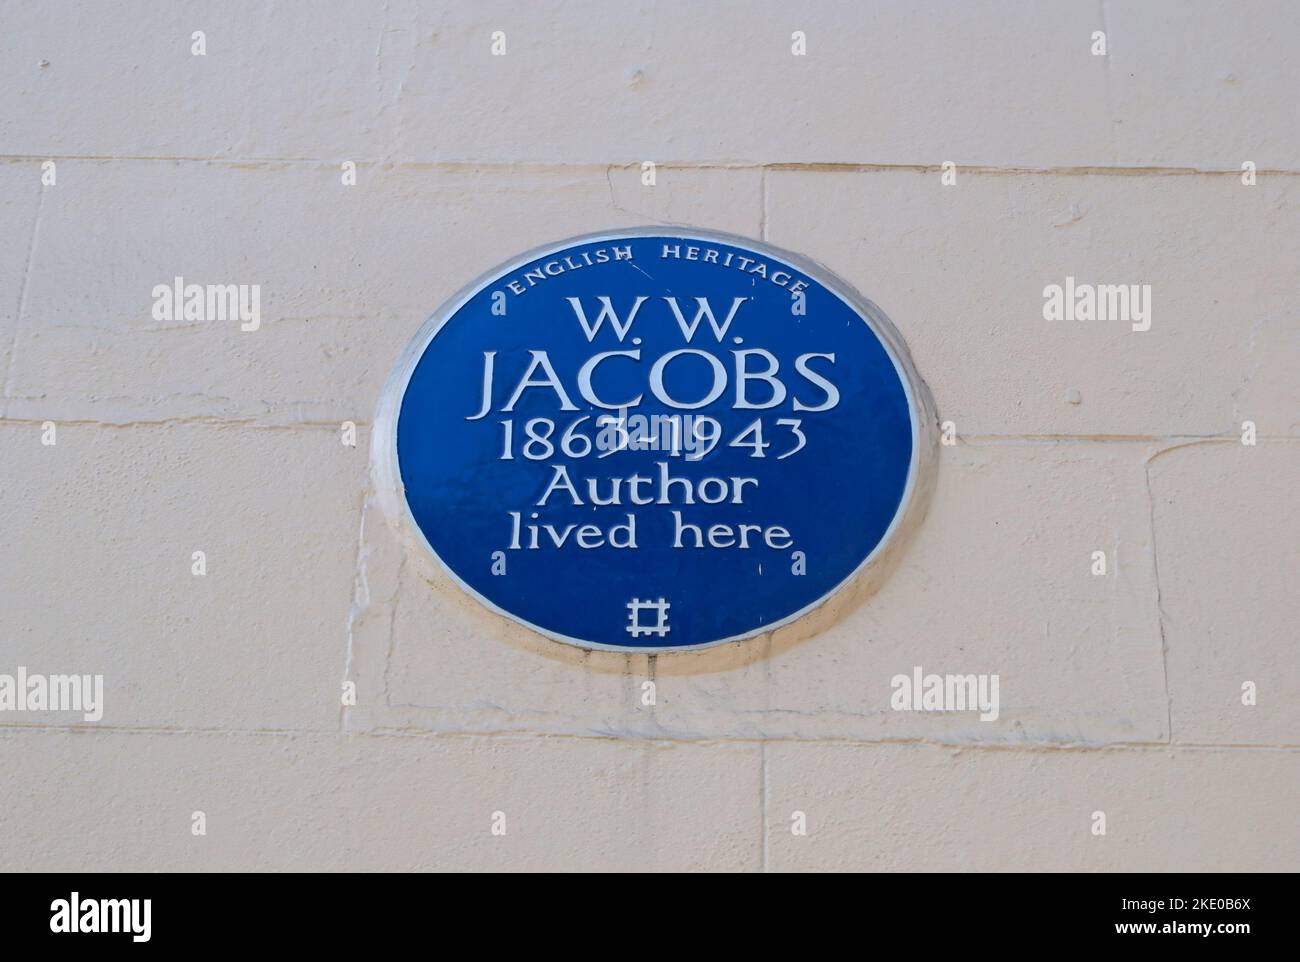 english heritage blue plaque marking a home of author ww jacobs, camden, london, england Stock Photo